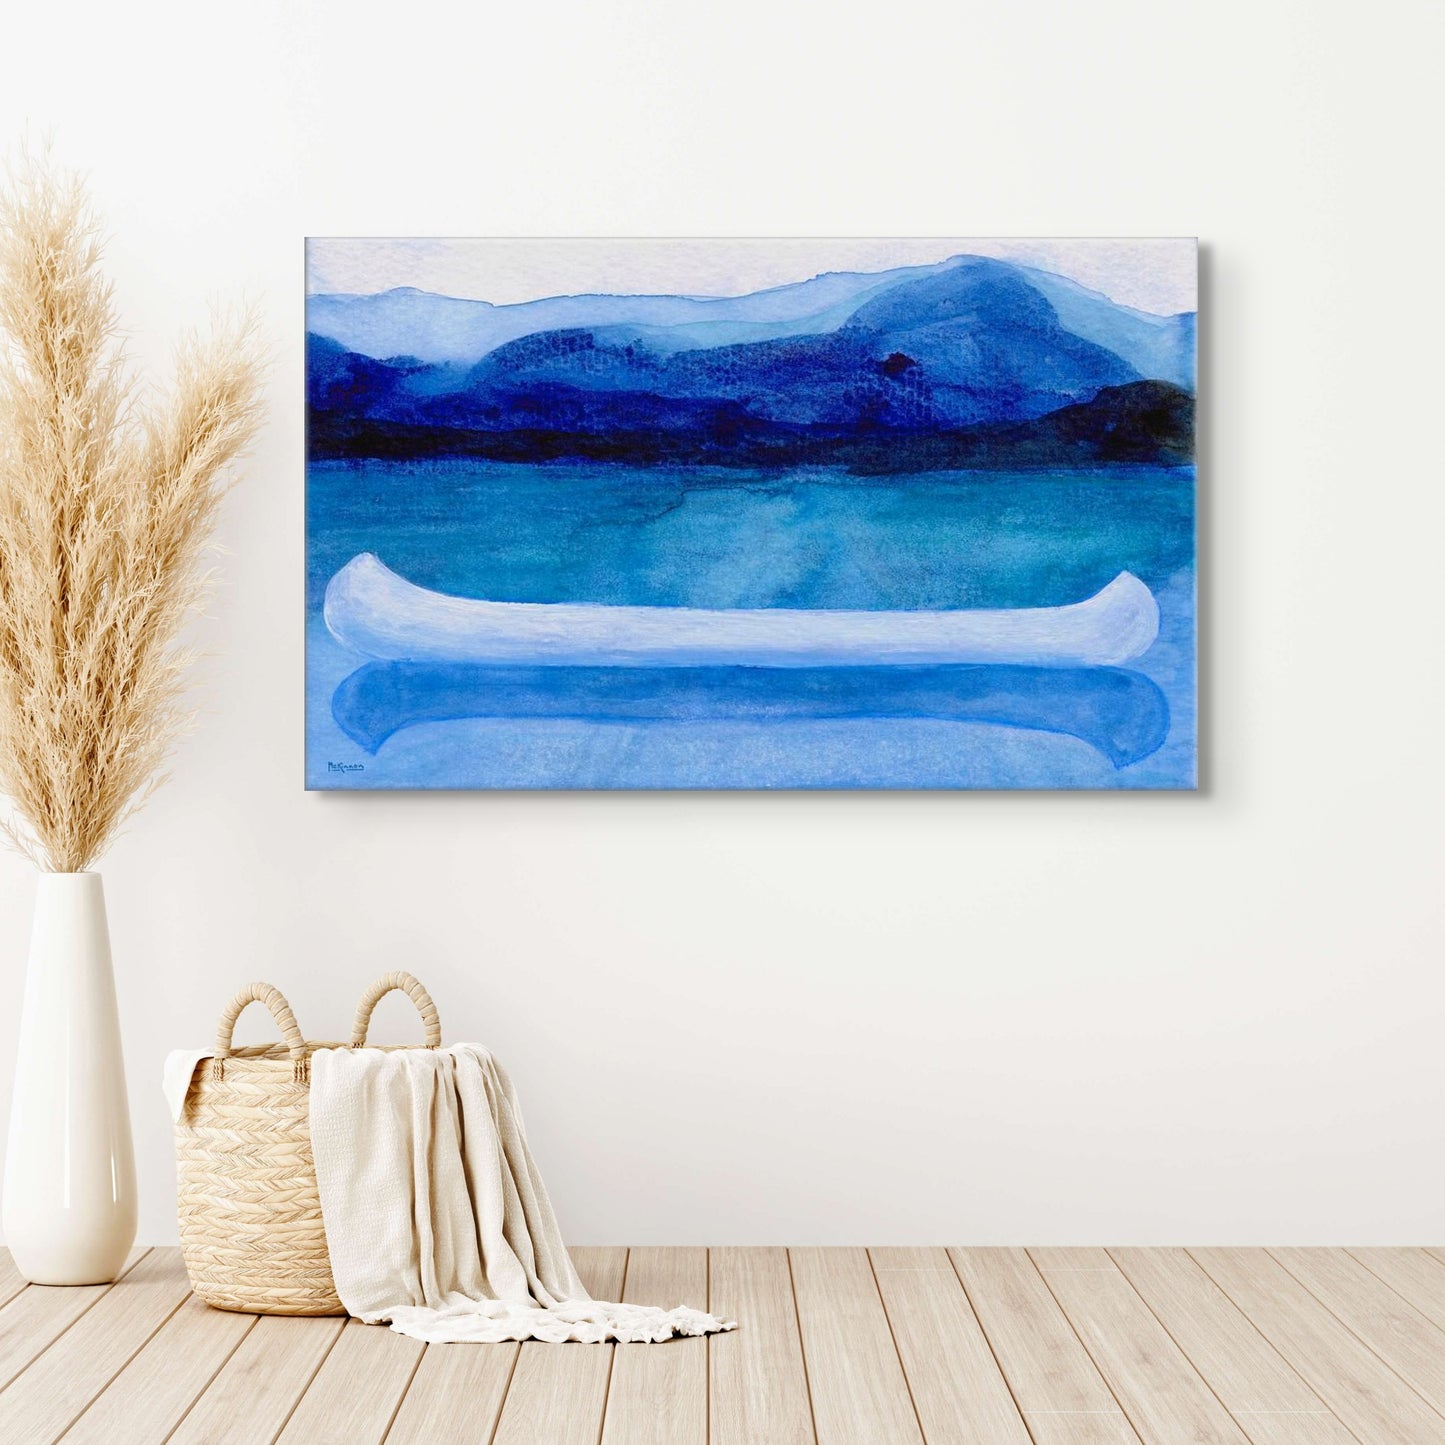 A work of canoeing art by Canadian artist Catherine McKinnon. The watercolor depicts a small white boat, a "canoe", on blue water with a dark blue distant shore and lighter blue distant moutains. The giclee print is frameless and is mounted on a white wall above a beachy wood floor, straw beach tote, draped blanket and white vase with tall wheat-colored fronds.